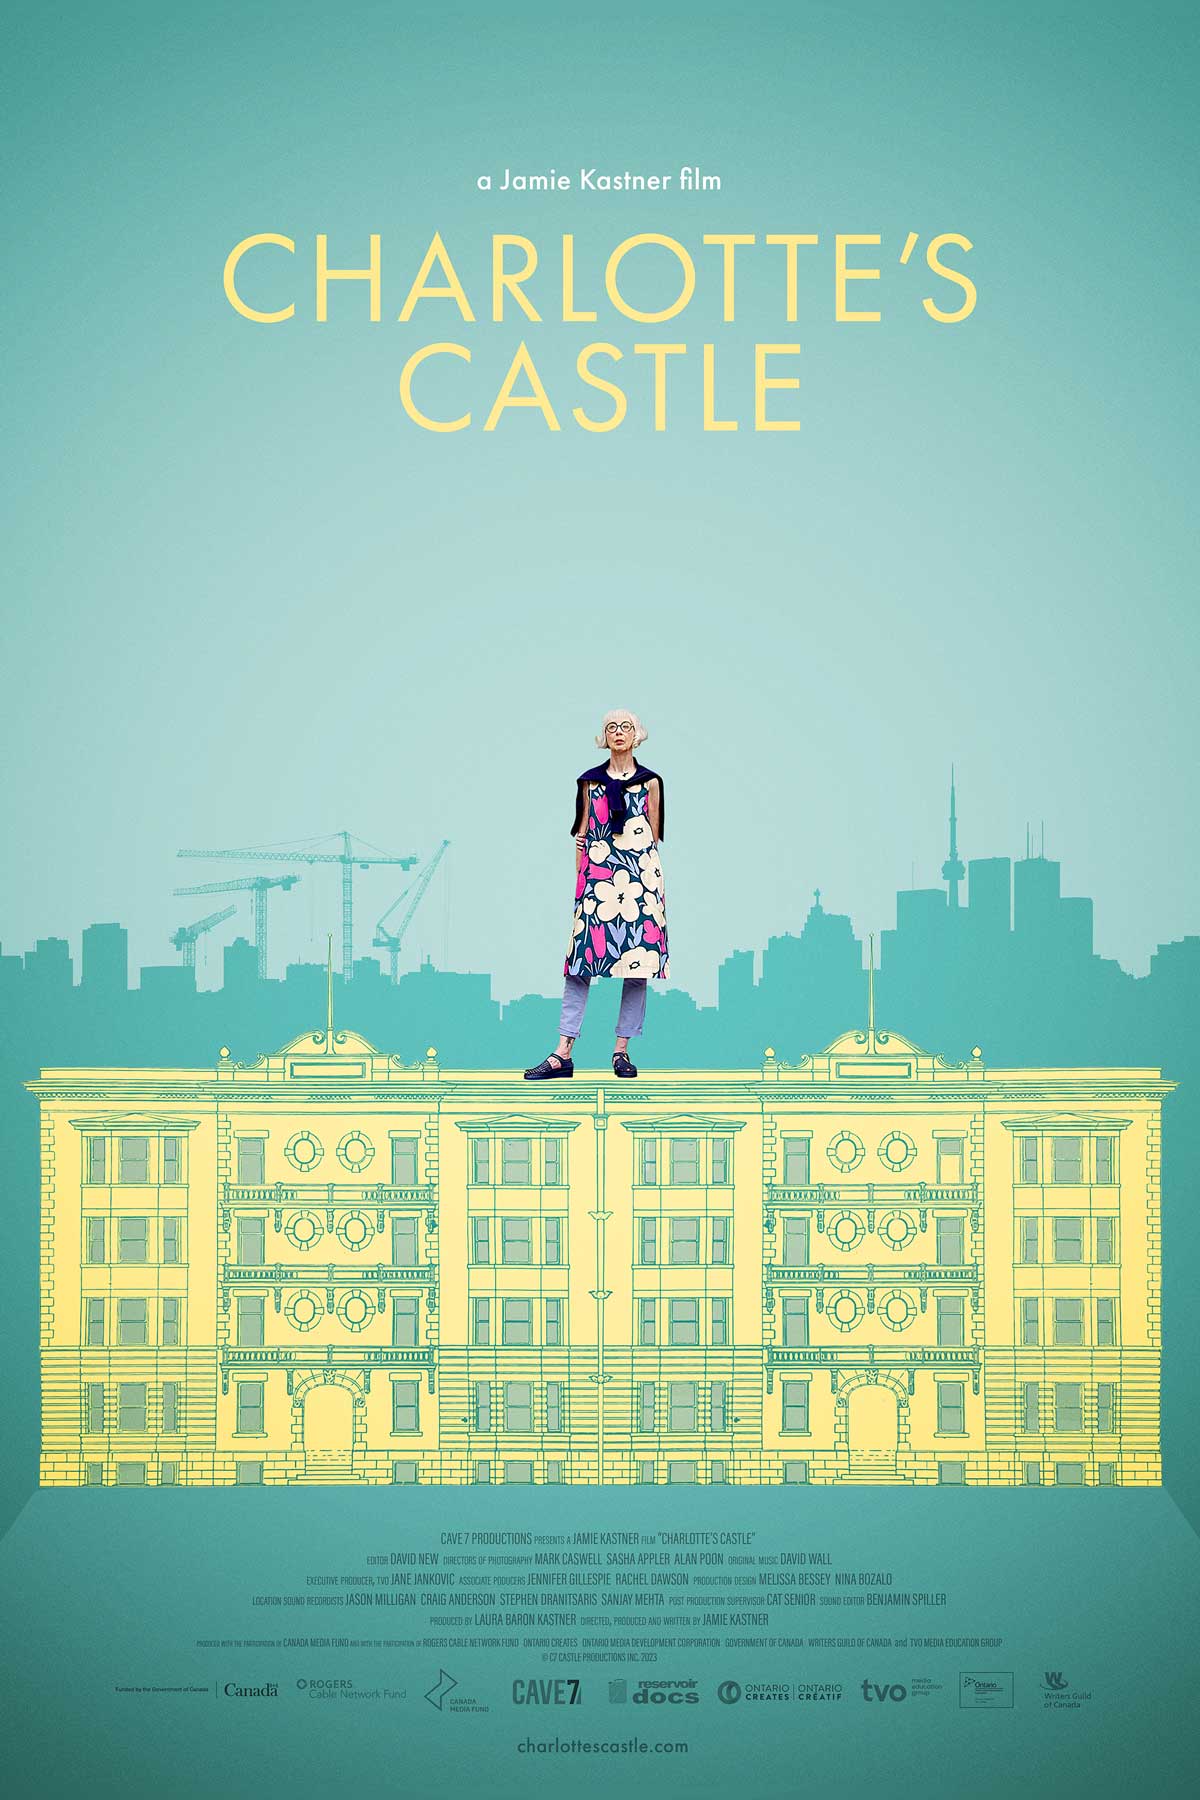 Promotional poster for Charlotte's Castle.